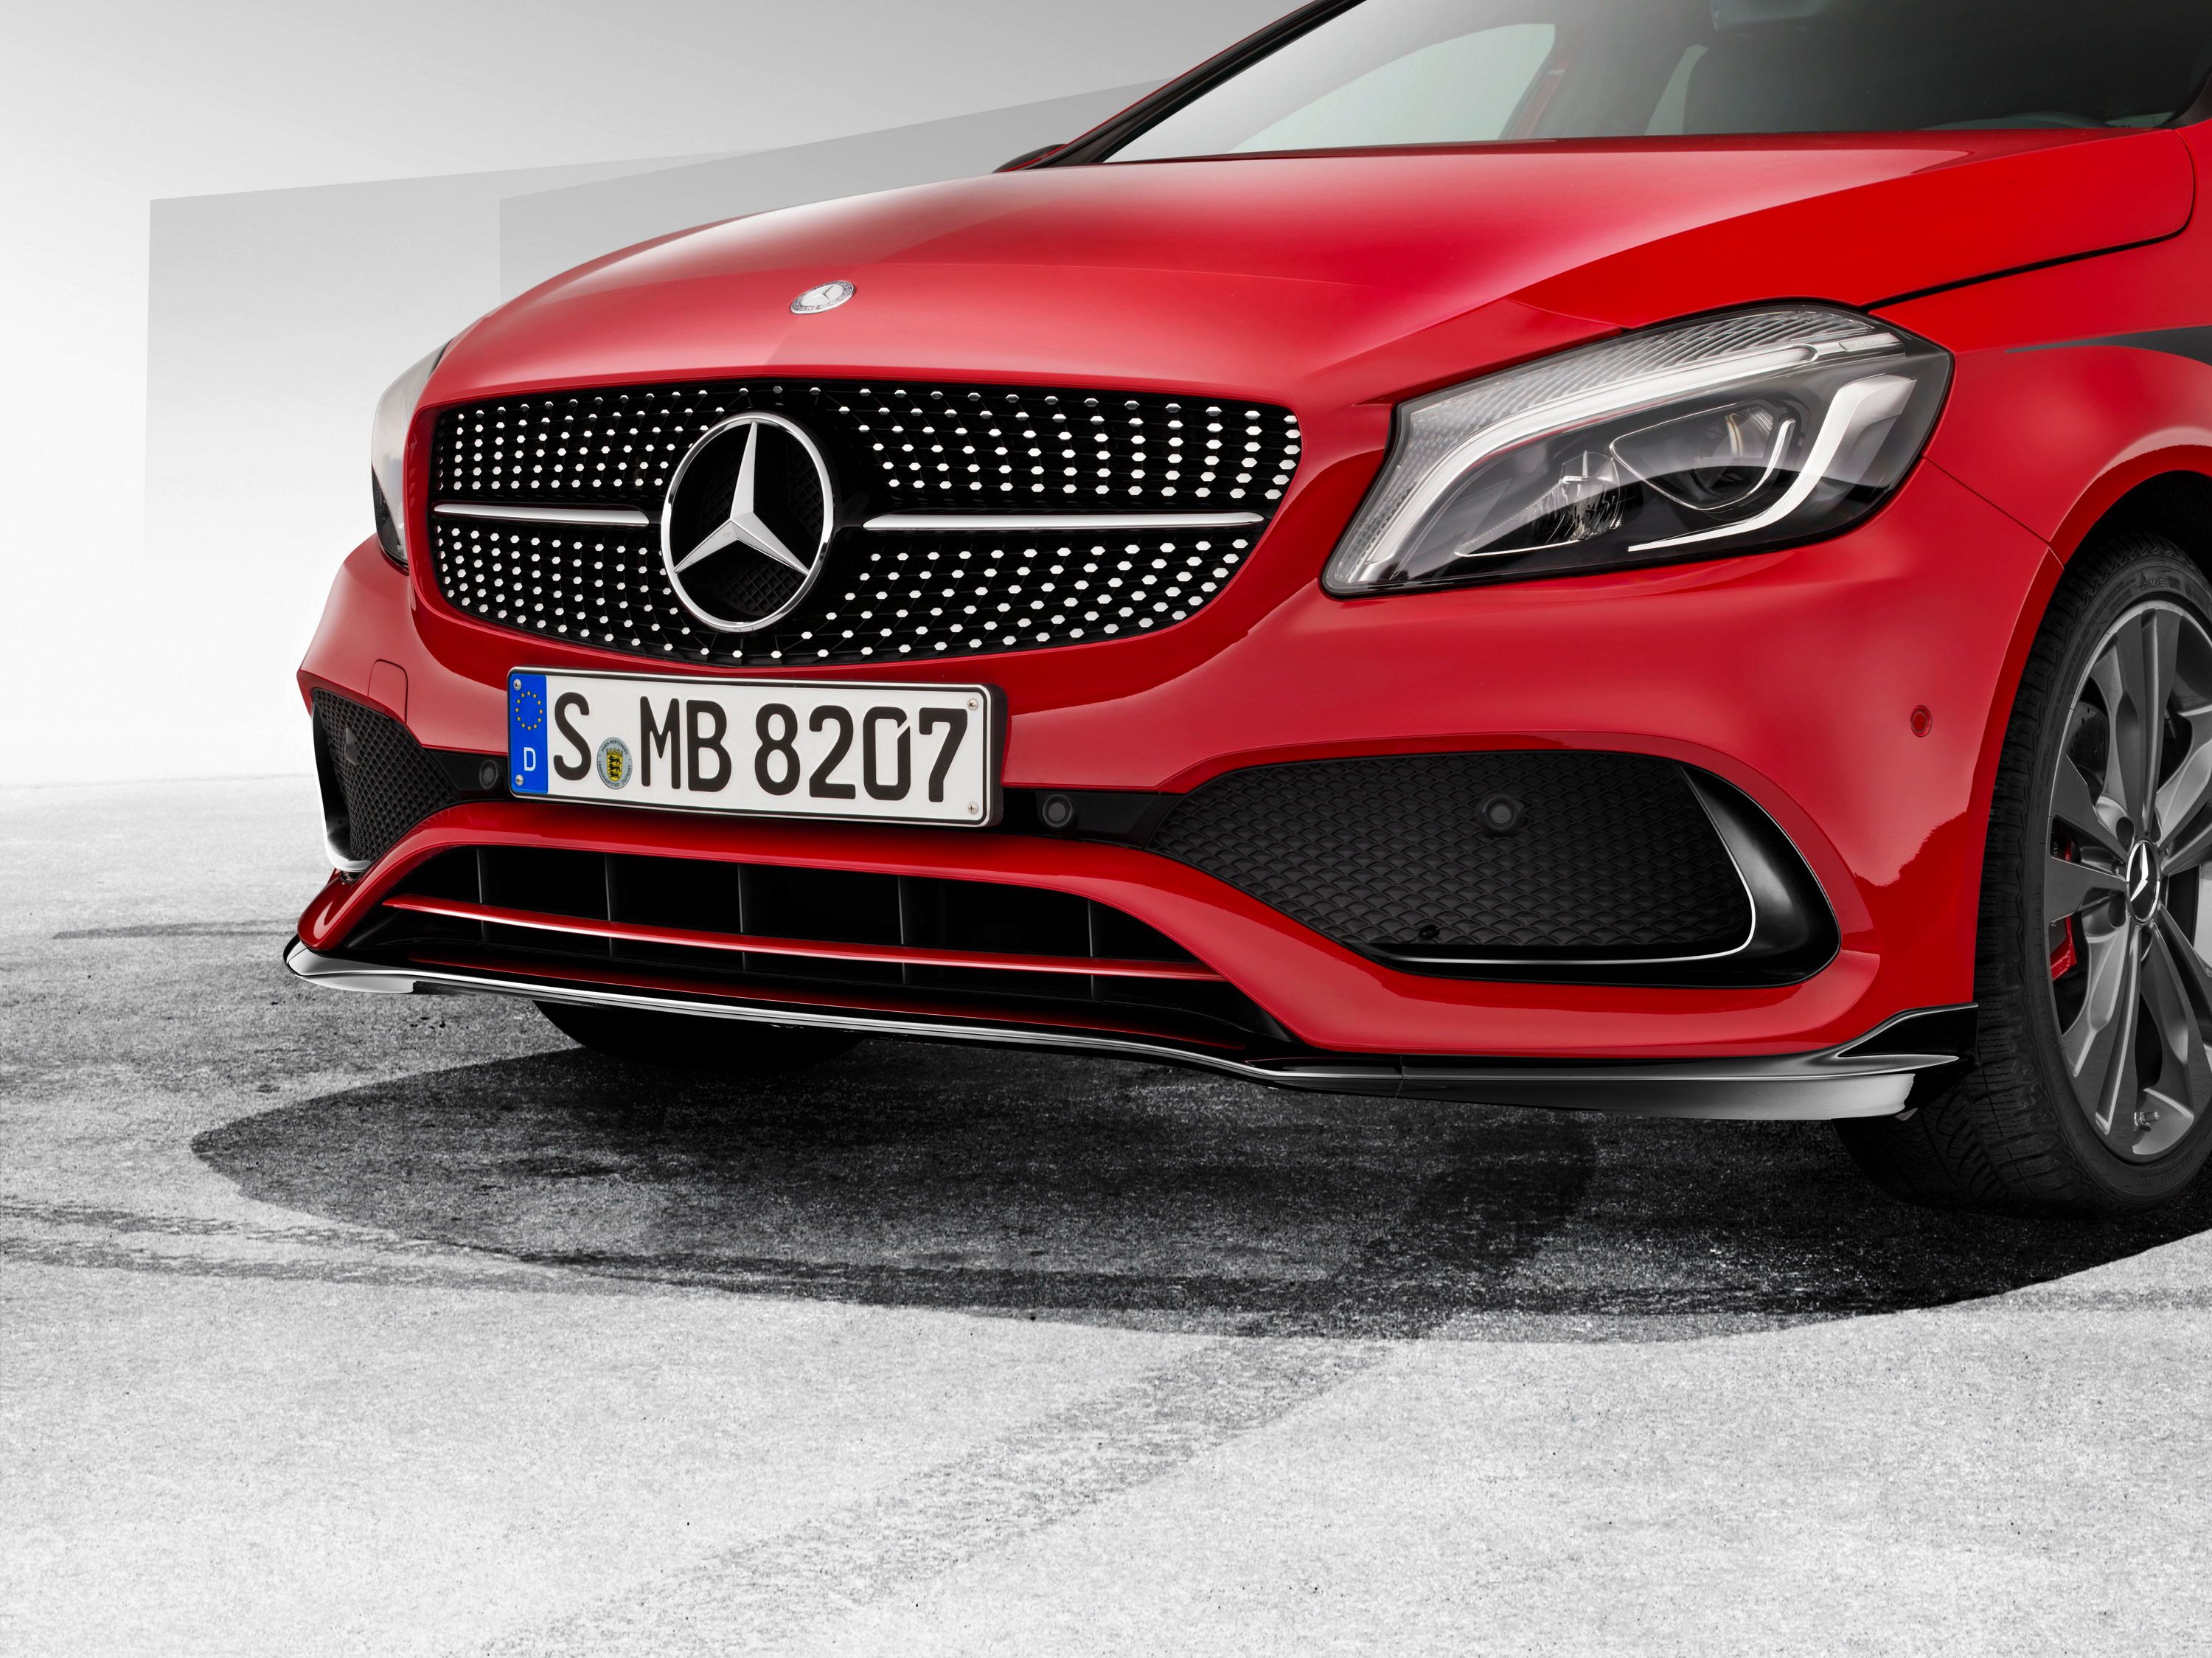 2016 Mercedes-Benz A-Class With AMG Body Kit